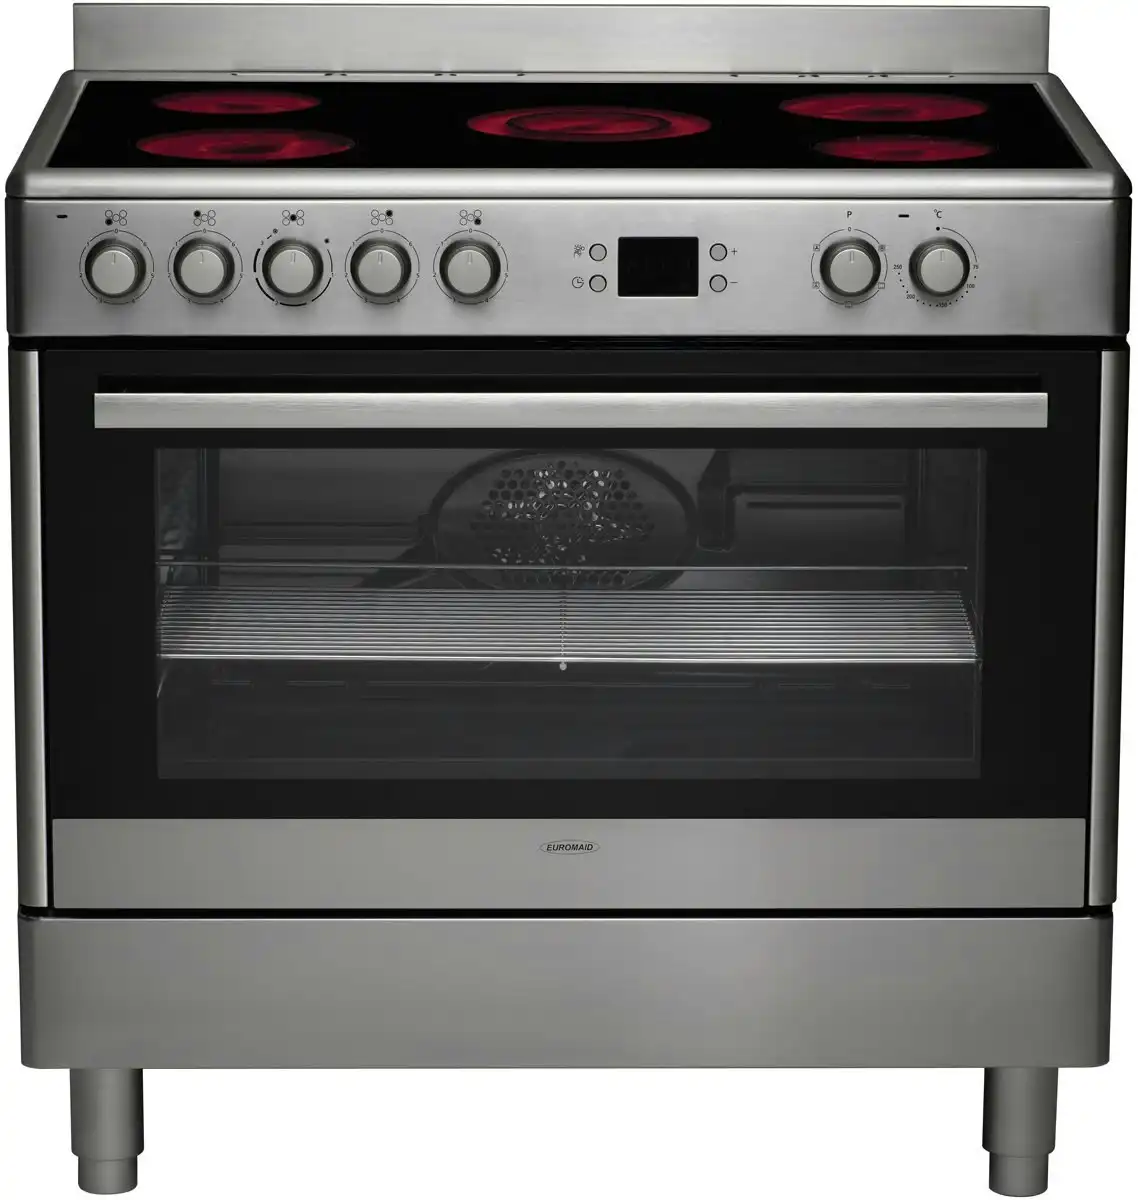 Euromaid 90cm Freestanding Electric Oven/Stove